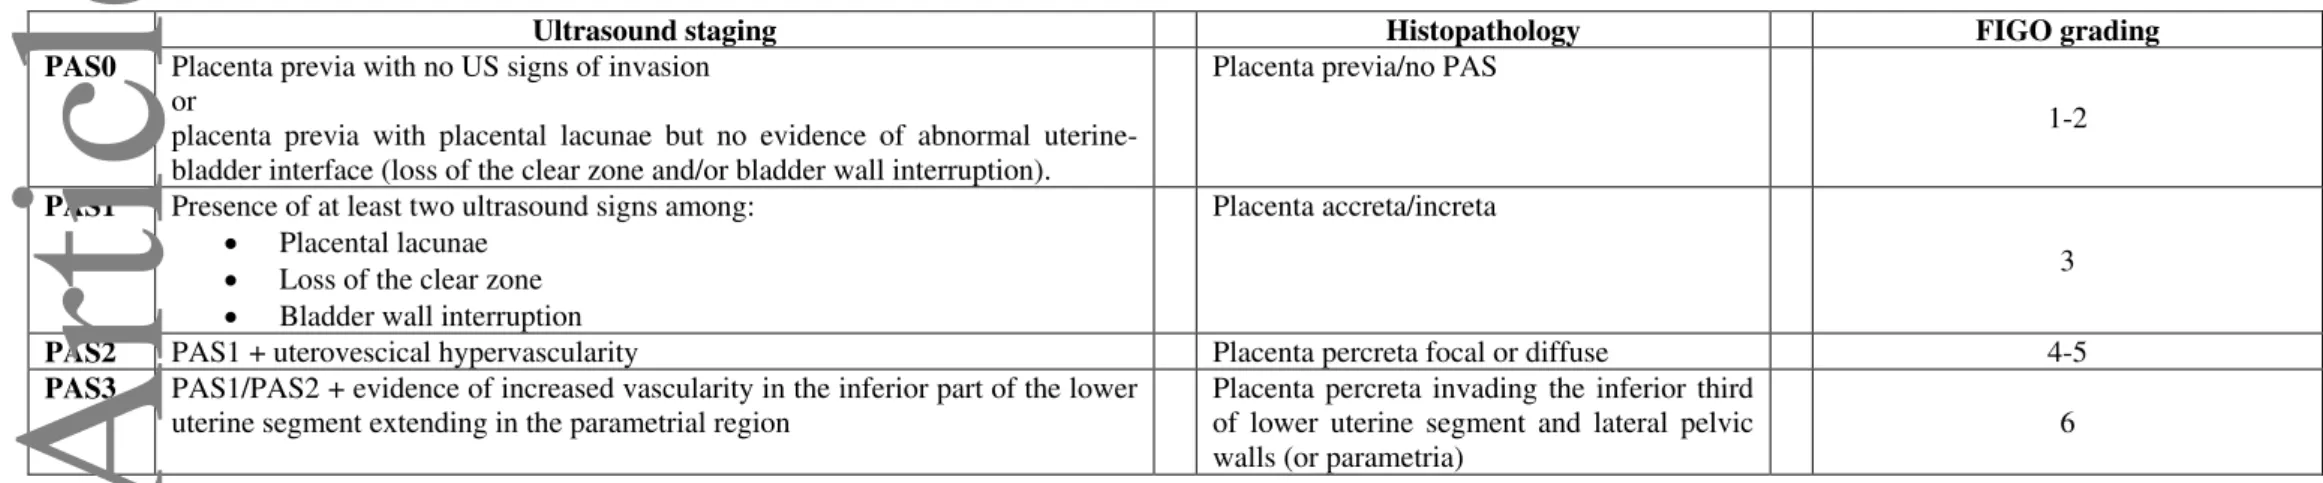 Table 5. Ultrasound staging of PAS and correlation with histopathology and FIGO staging system